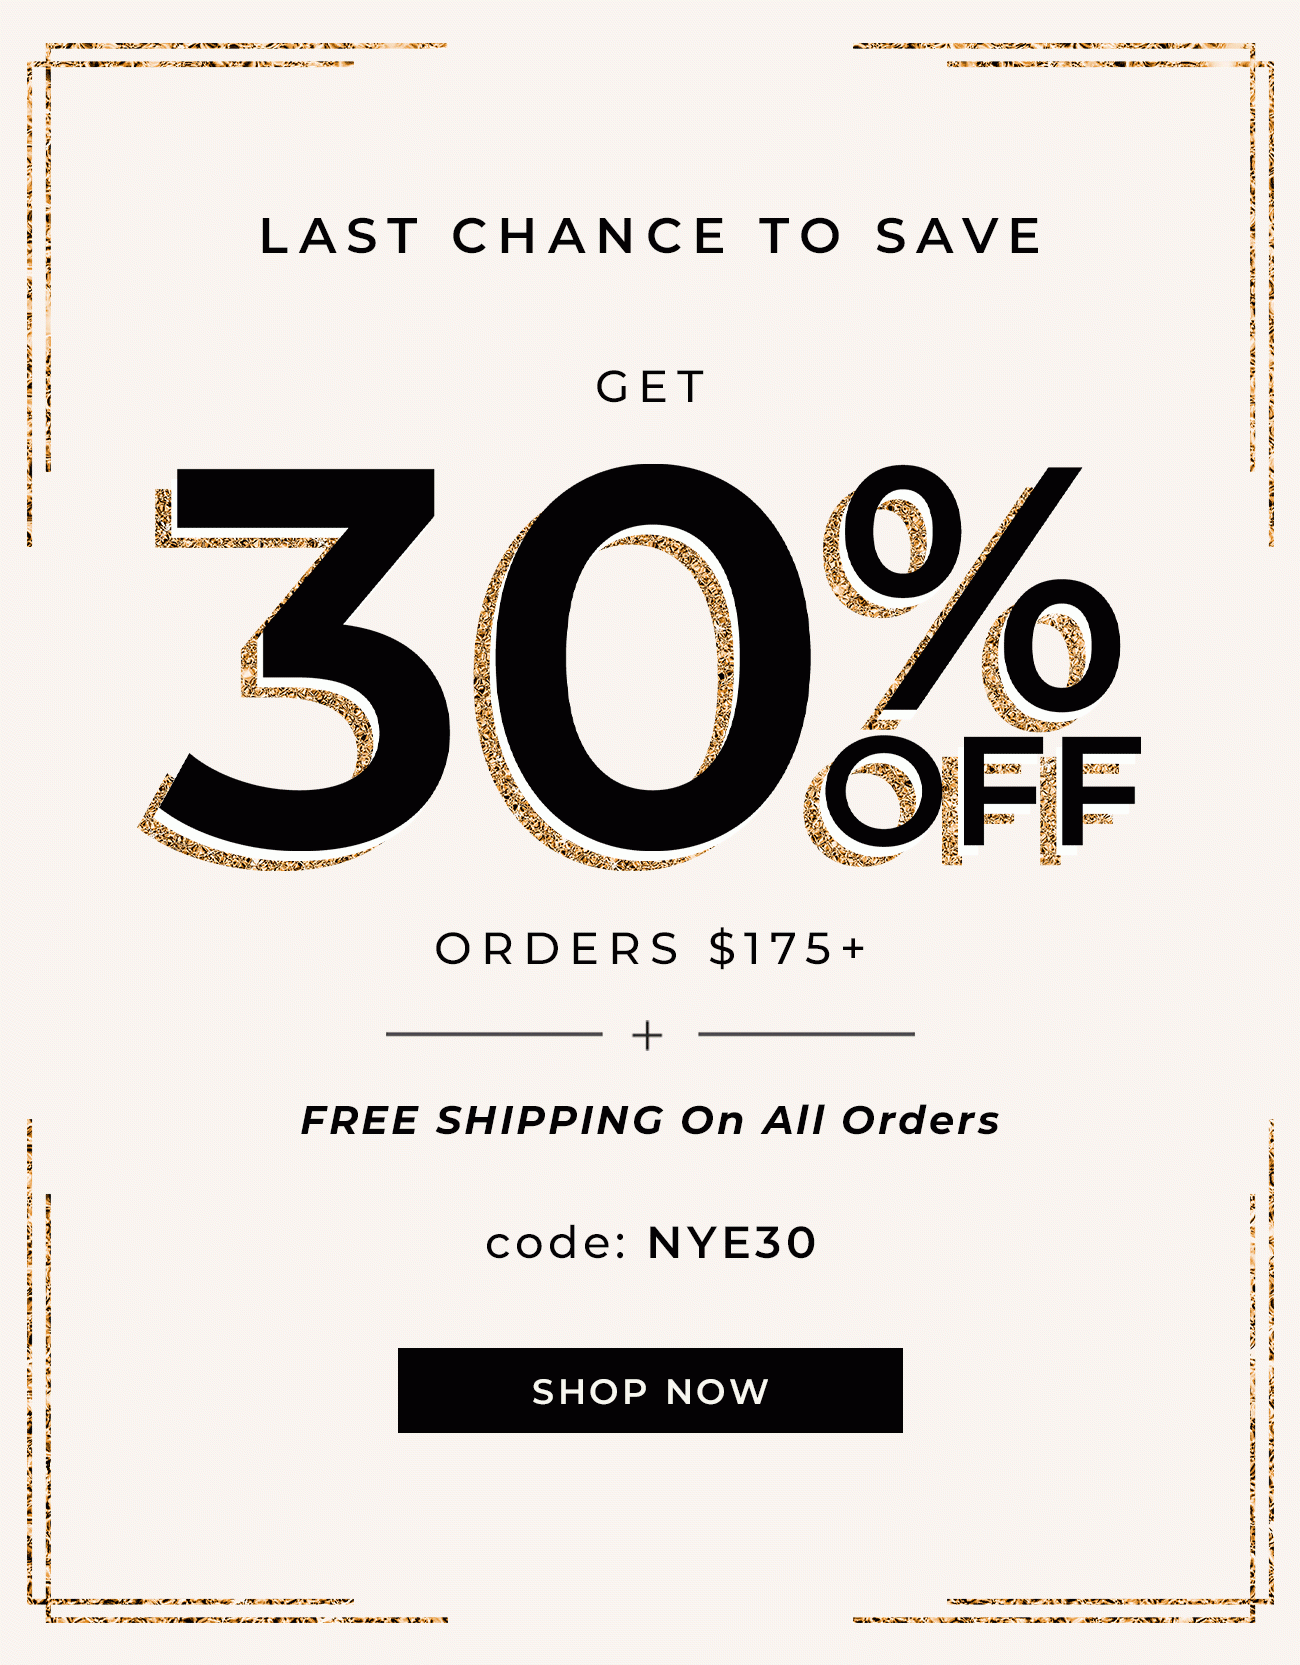 Last Chance To Save - Get 30% Orders $175